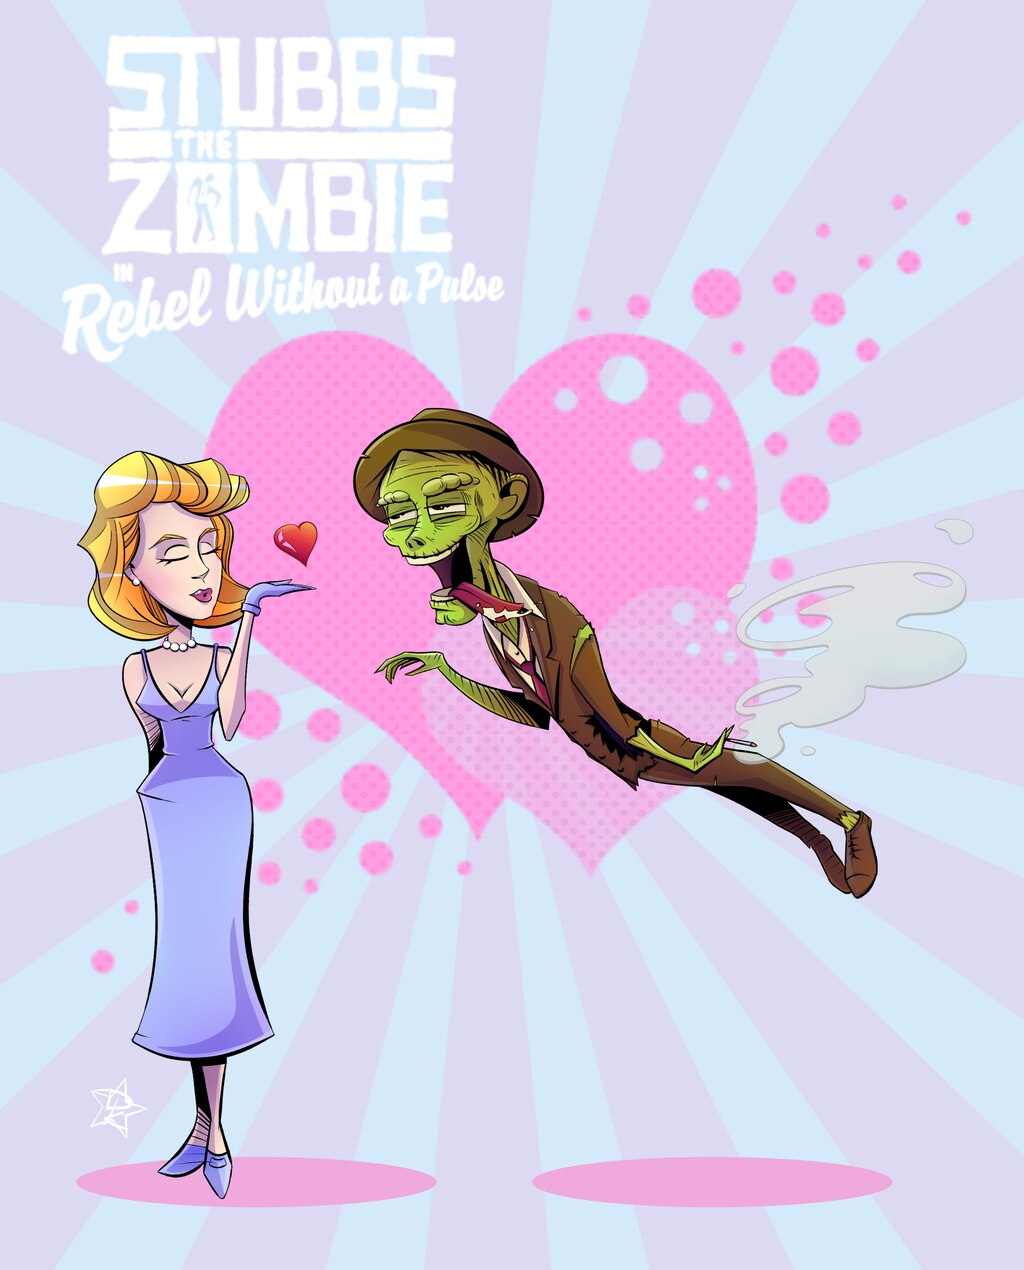 Steam 社区:: Stubbs the Zombie in Rebel Without a Pulse